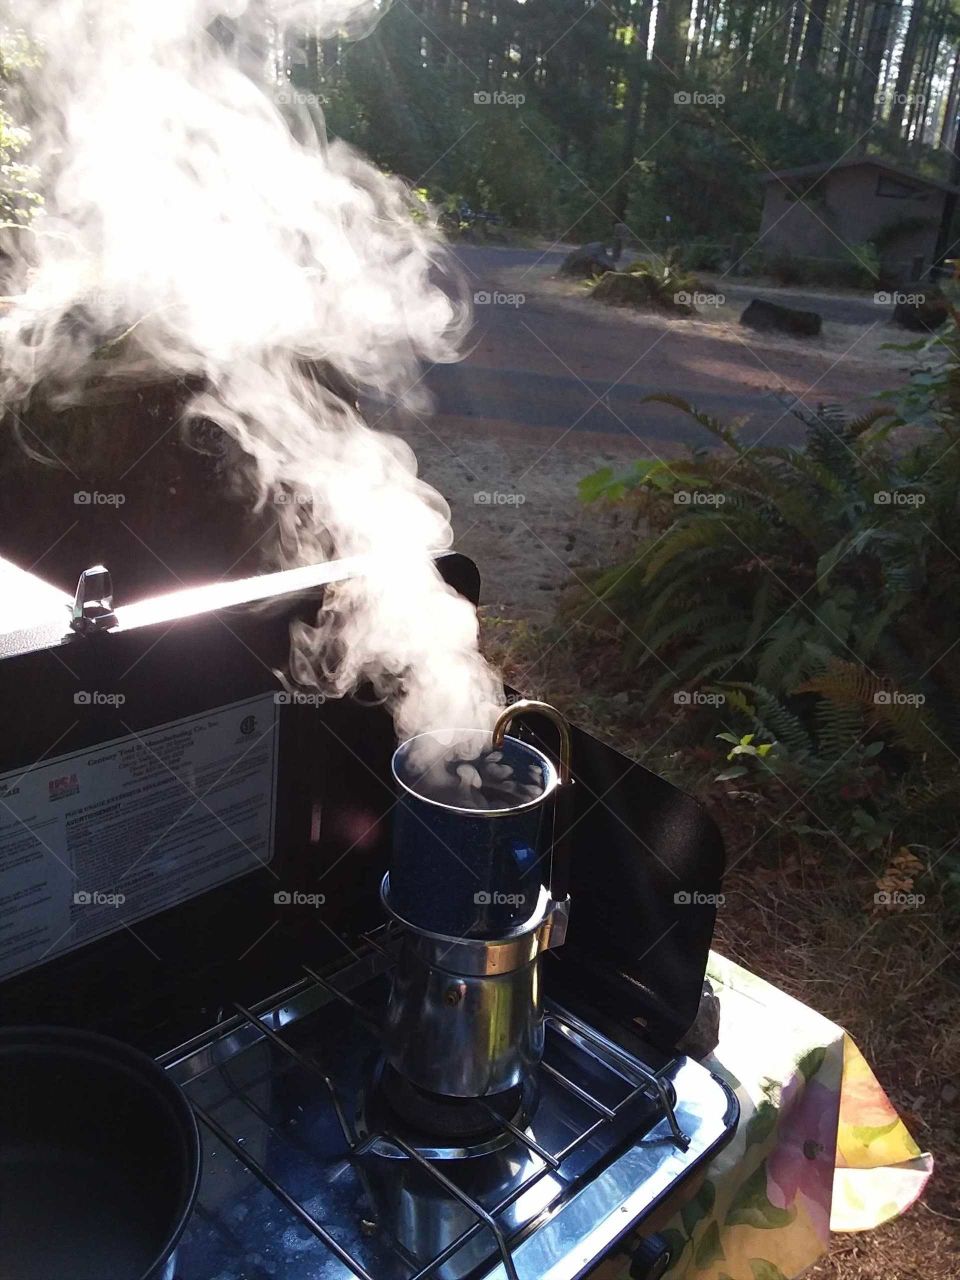 Brewing coffee outside camping with smoke